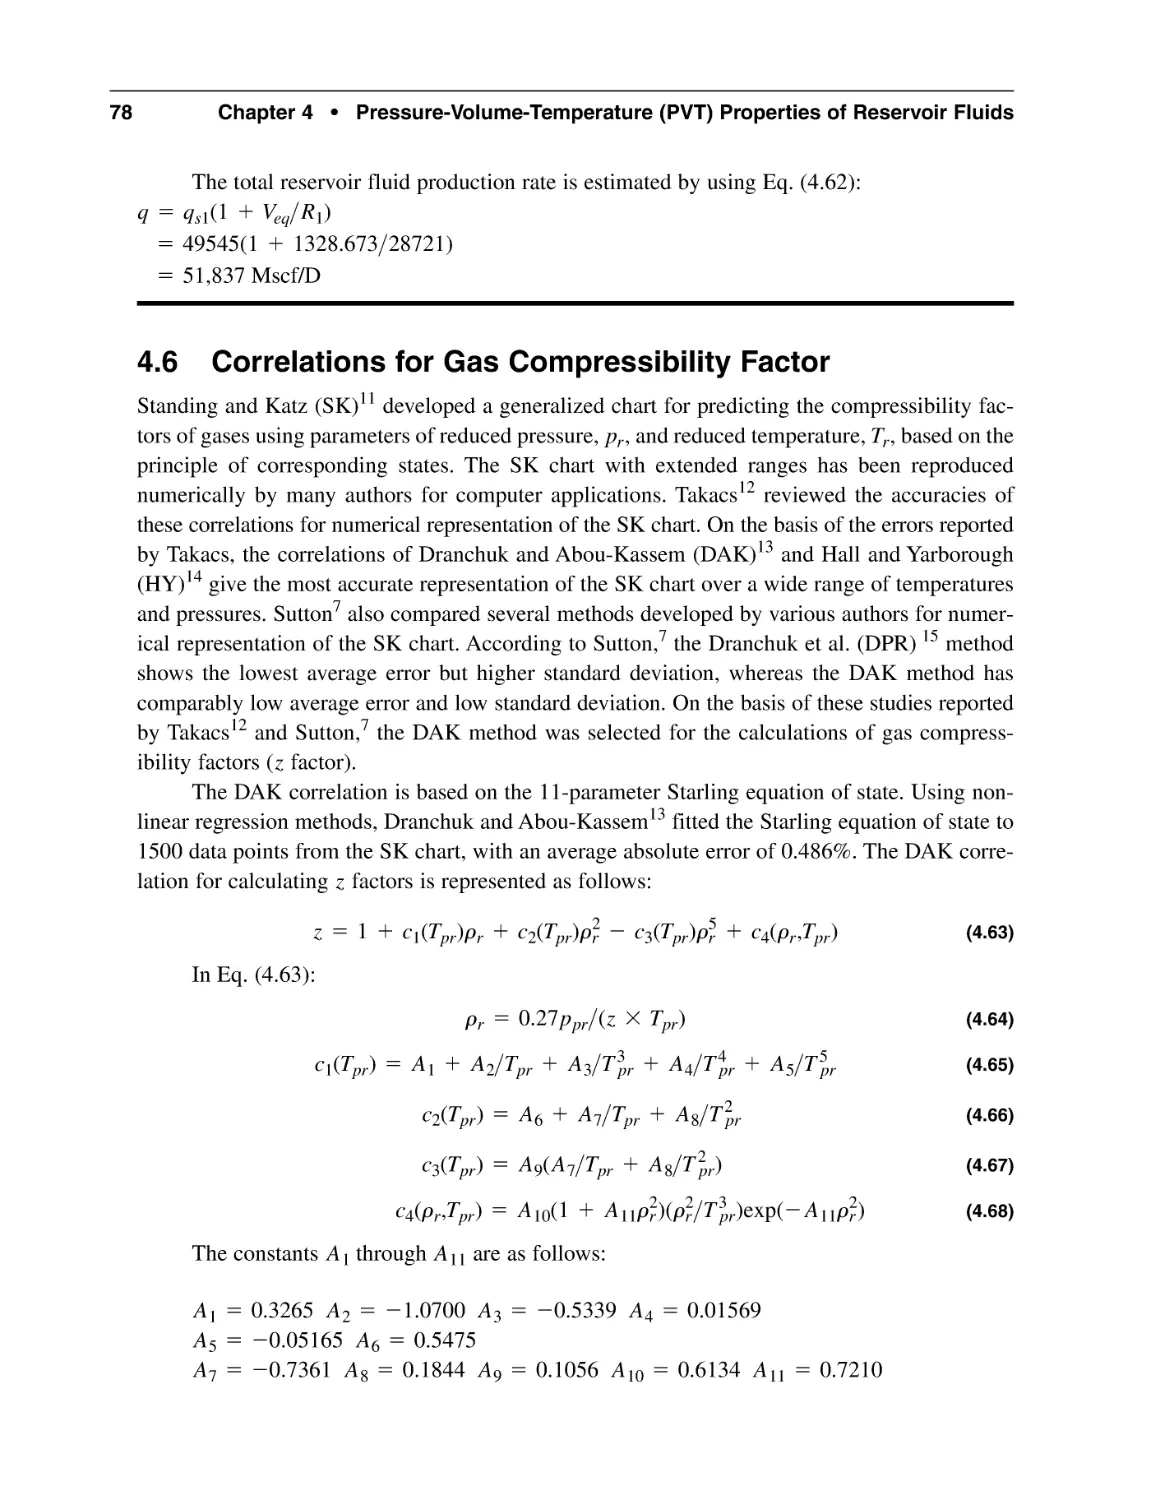 4.6 Correlations for Gas Compressibility Factor